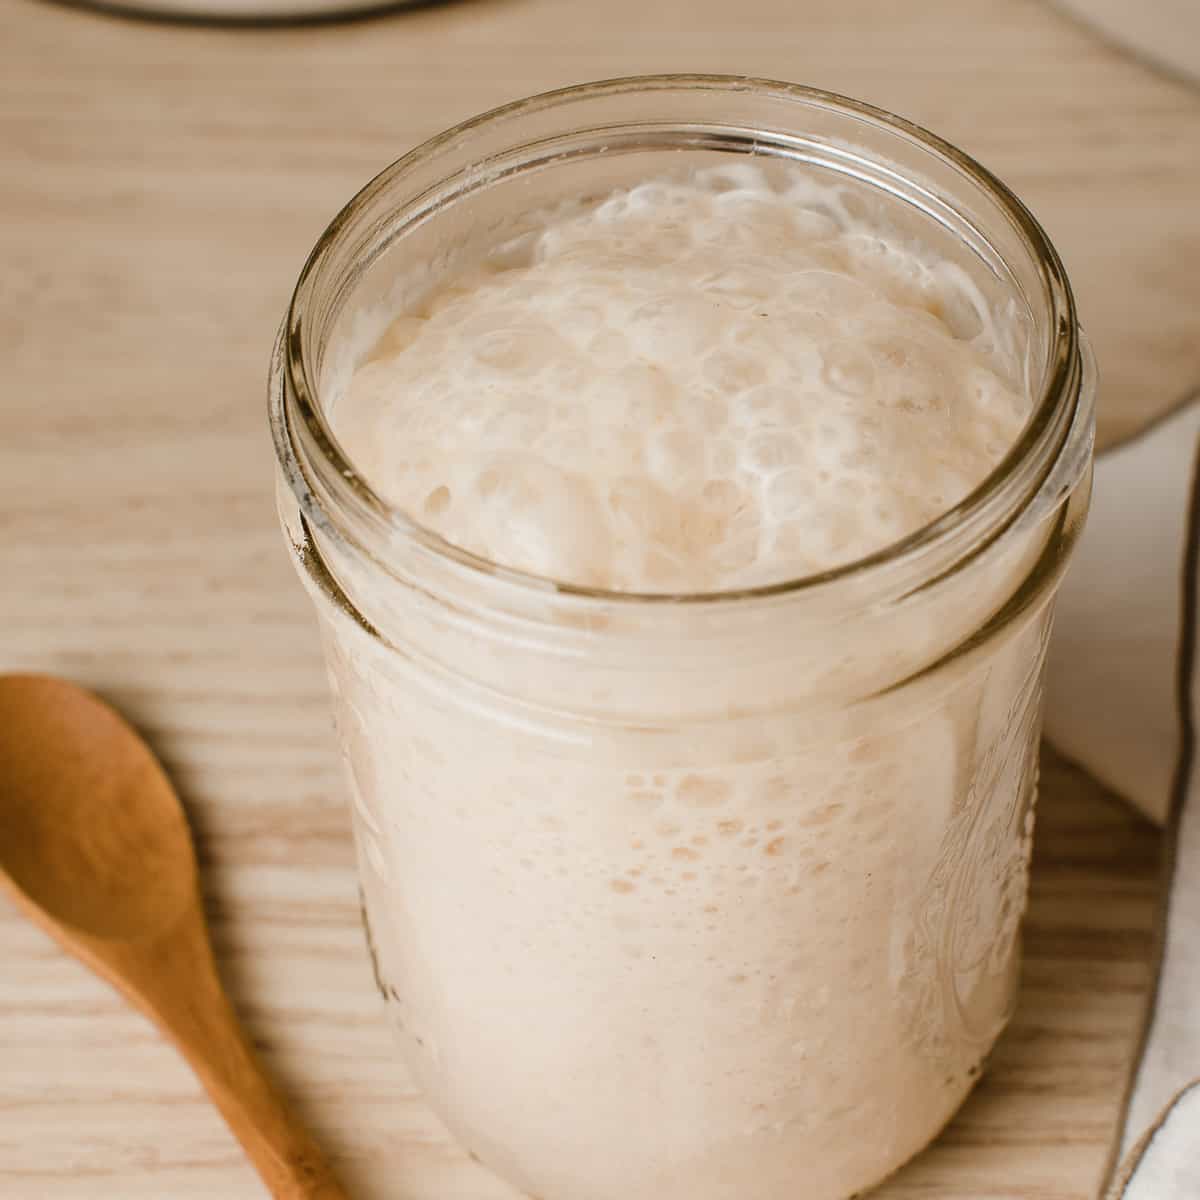 Bubbly active sourdough starter in a mason jar on the counter.